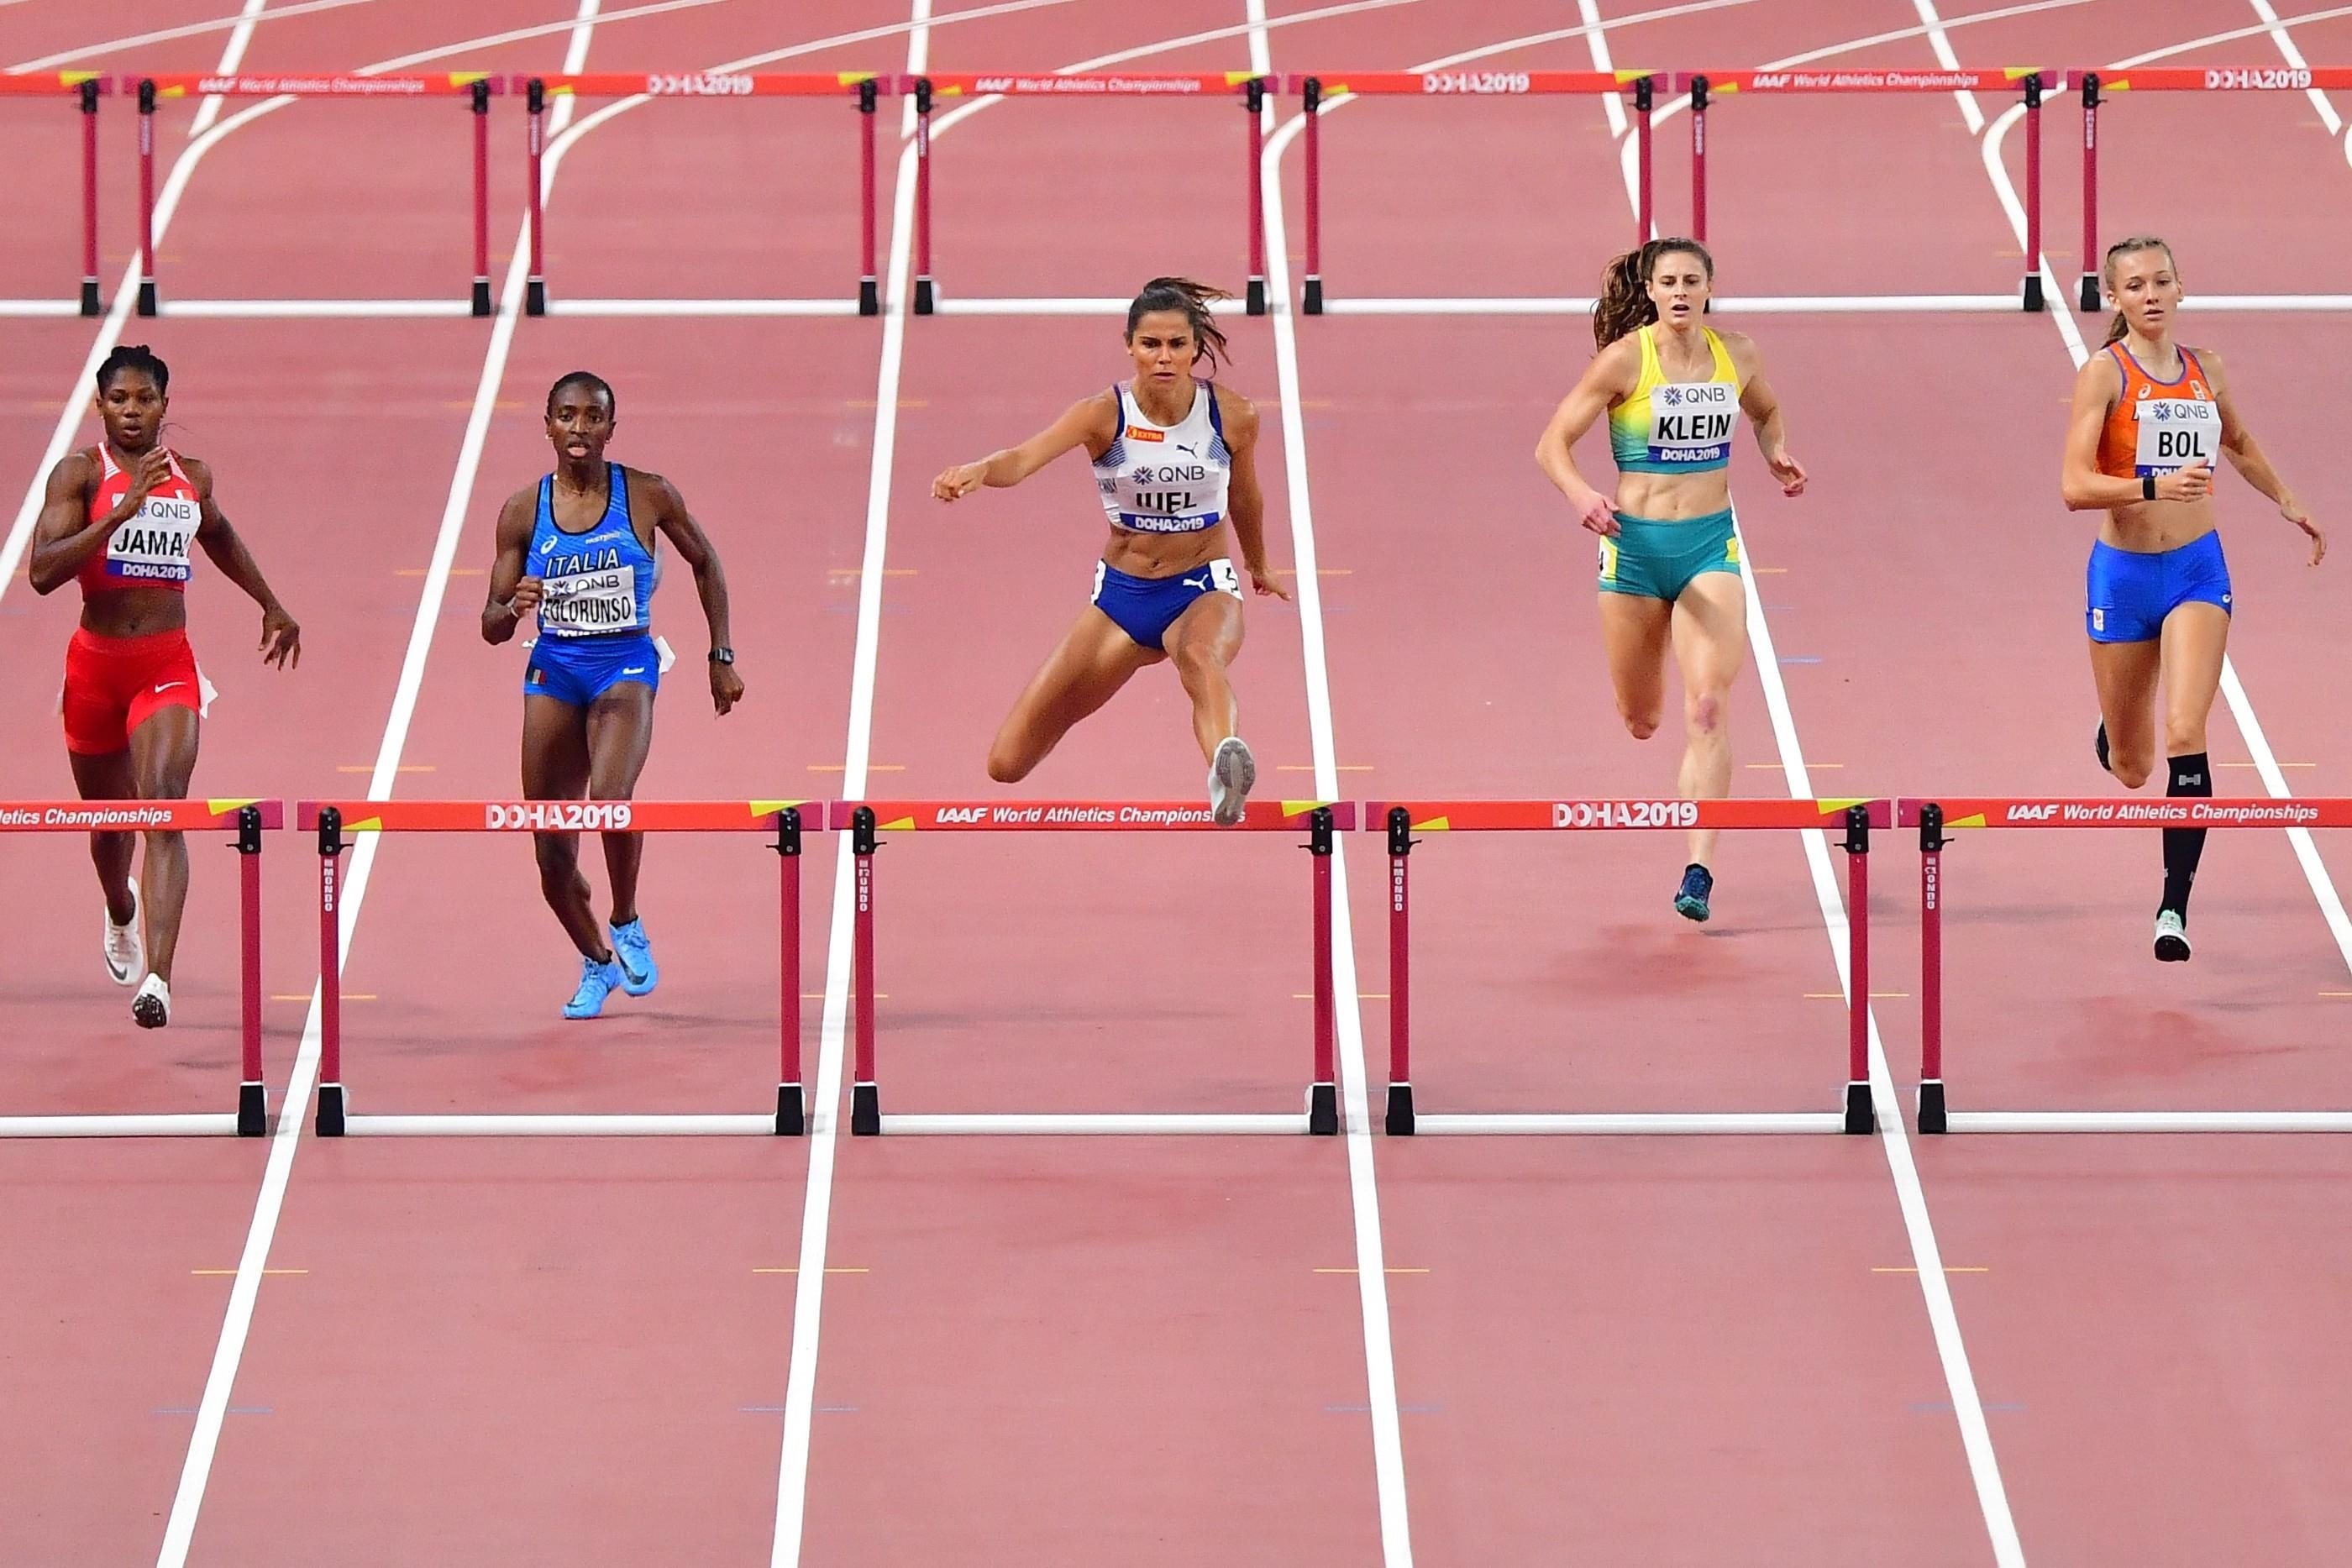 Hurdling: 400 Meters Hurdles, Running competition, The sport of running with obstacles, Klein, Bol. 2800x1870 HD Background.